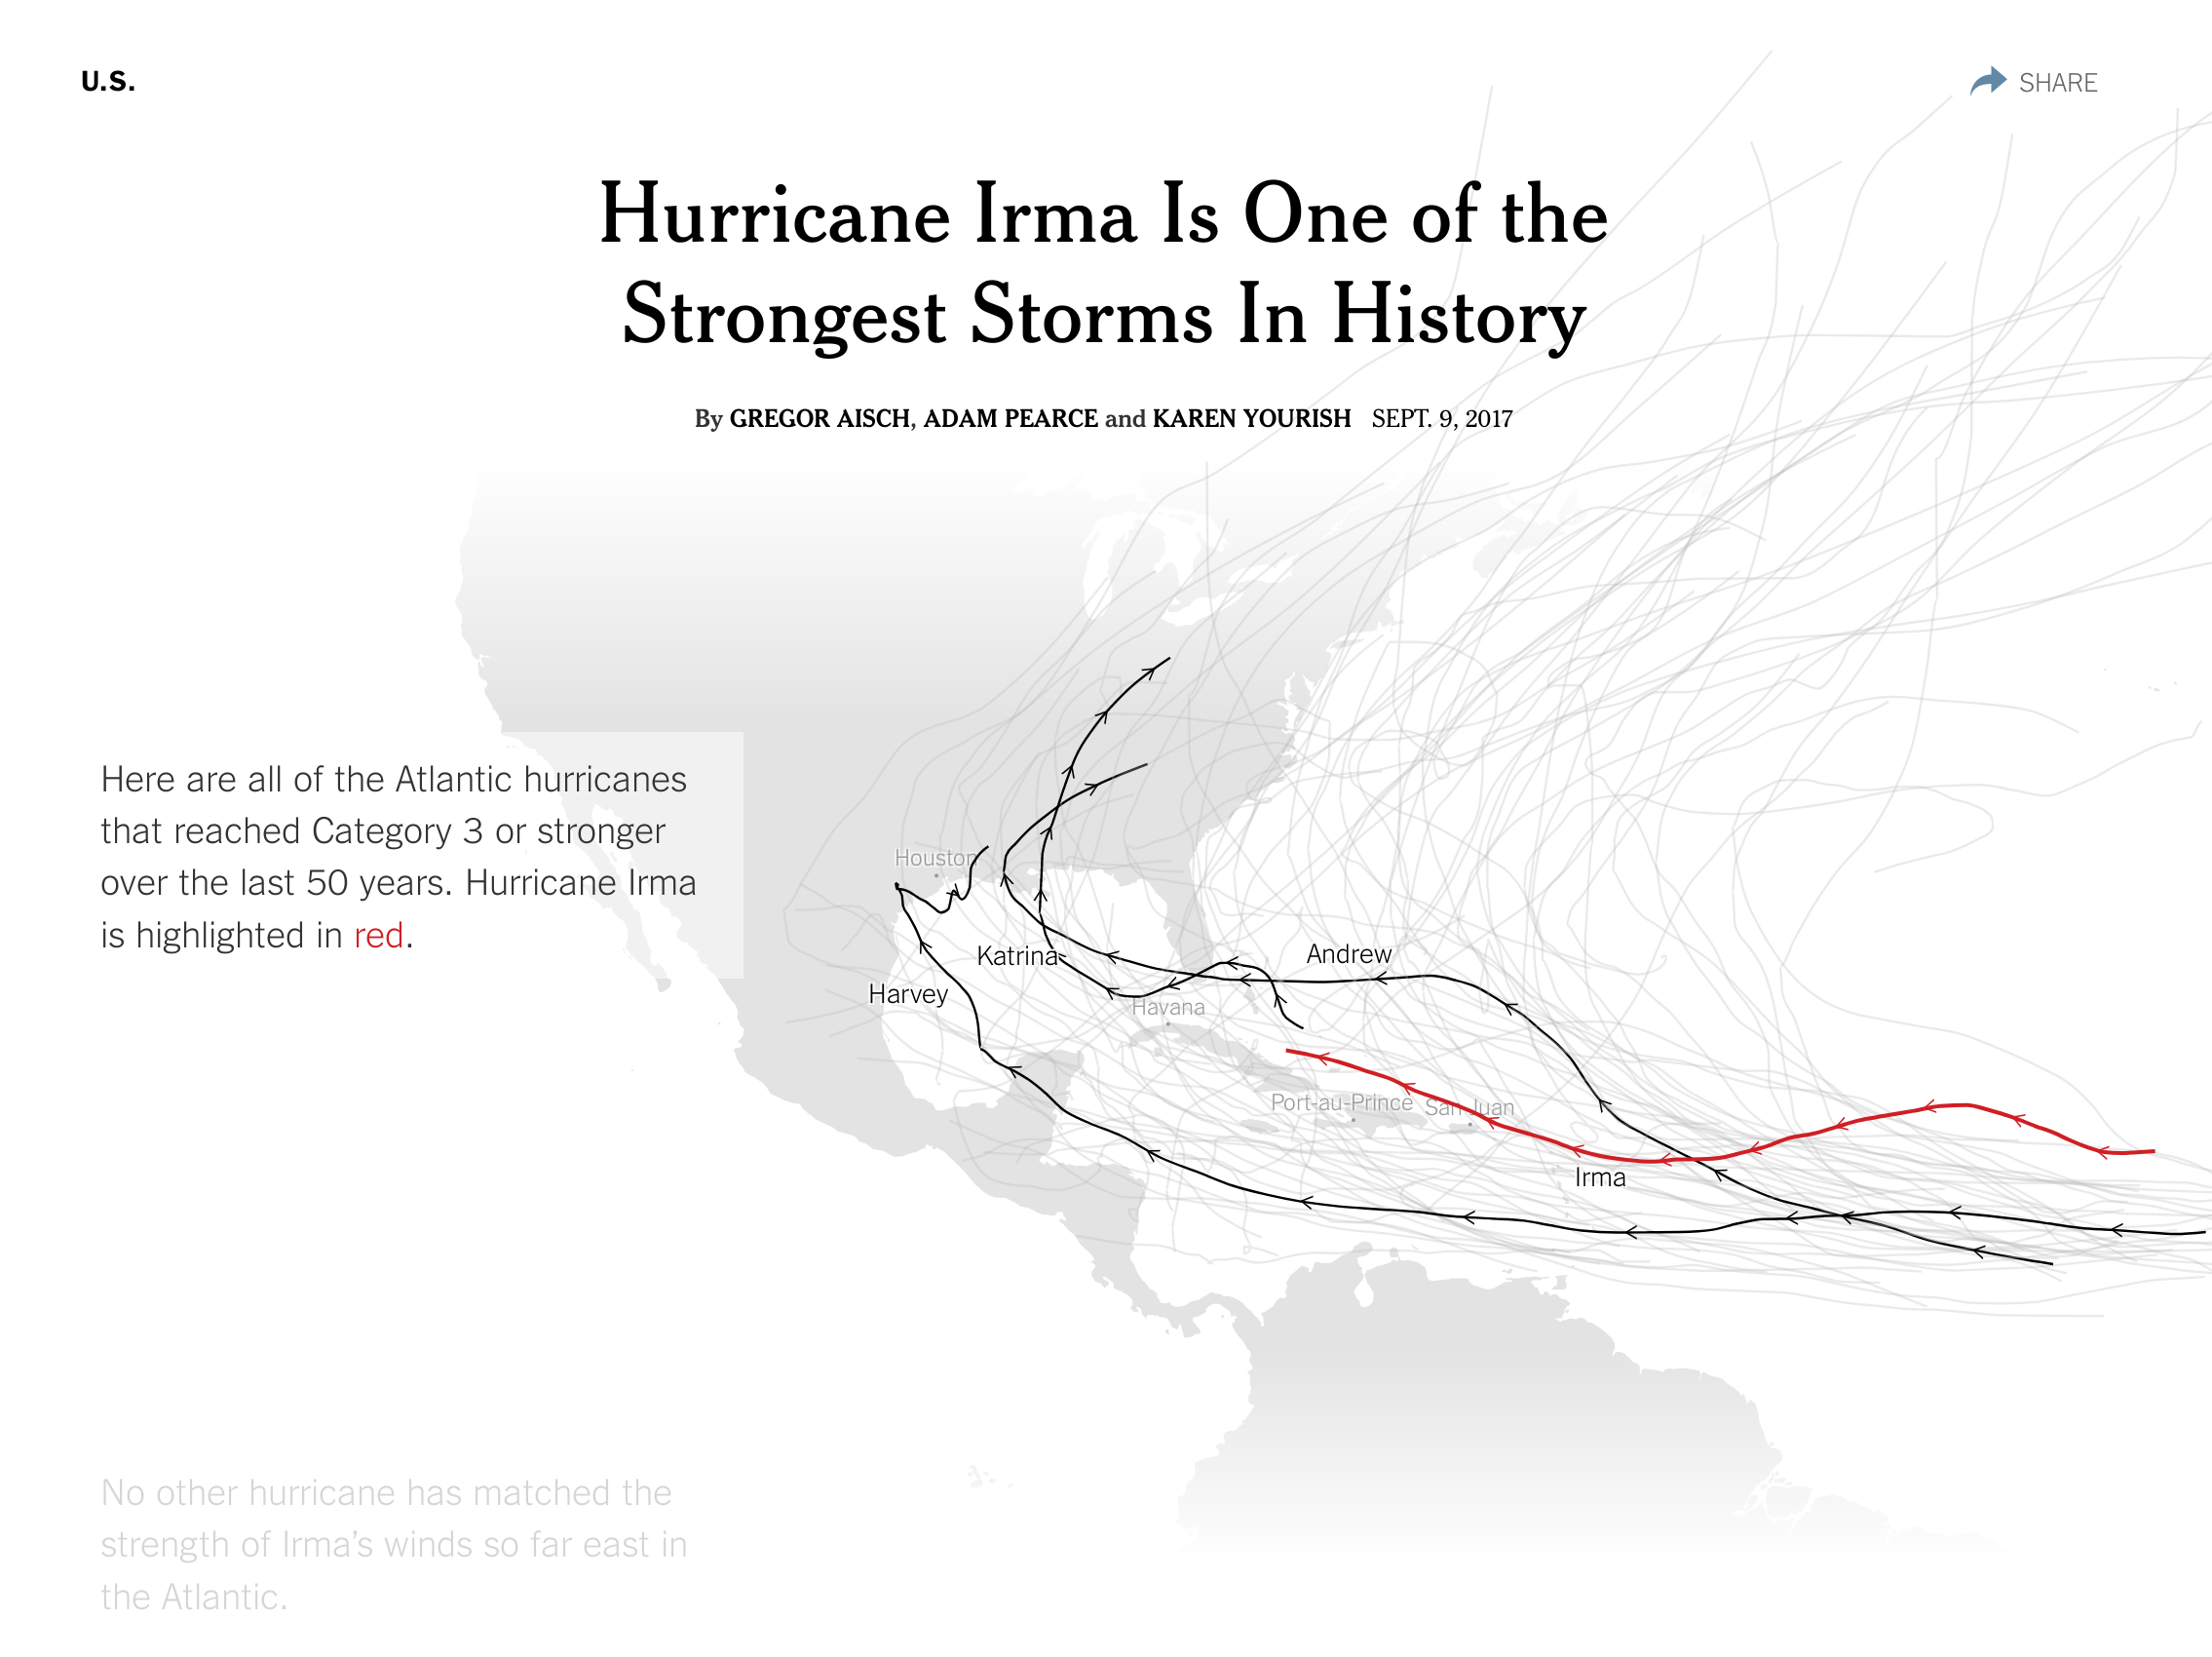 Hurricane Irma Is One of the Strongest Storms In History